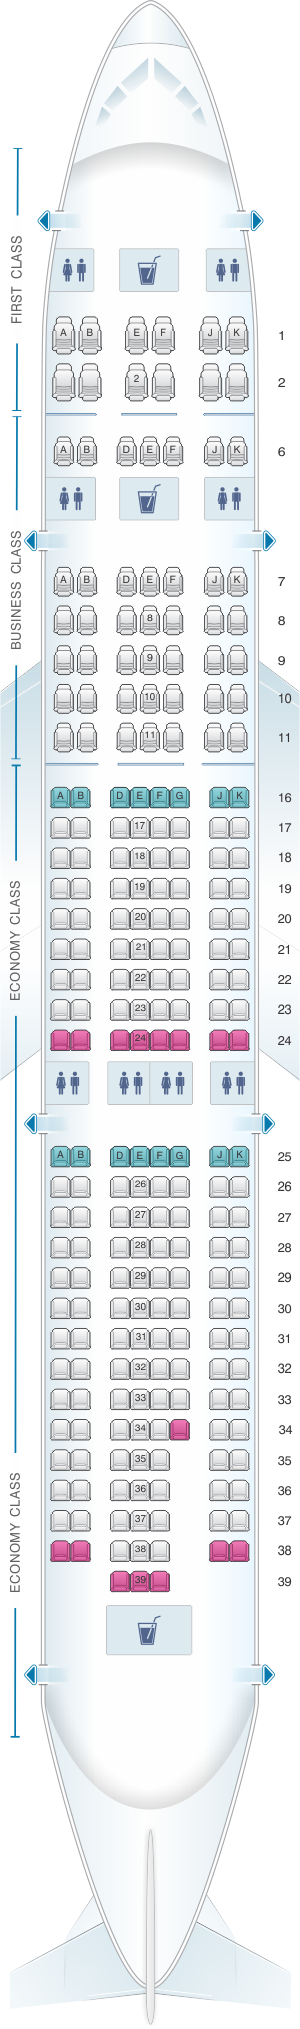 Seat map for Emirates Airbus A330 200 three class